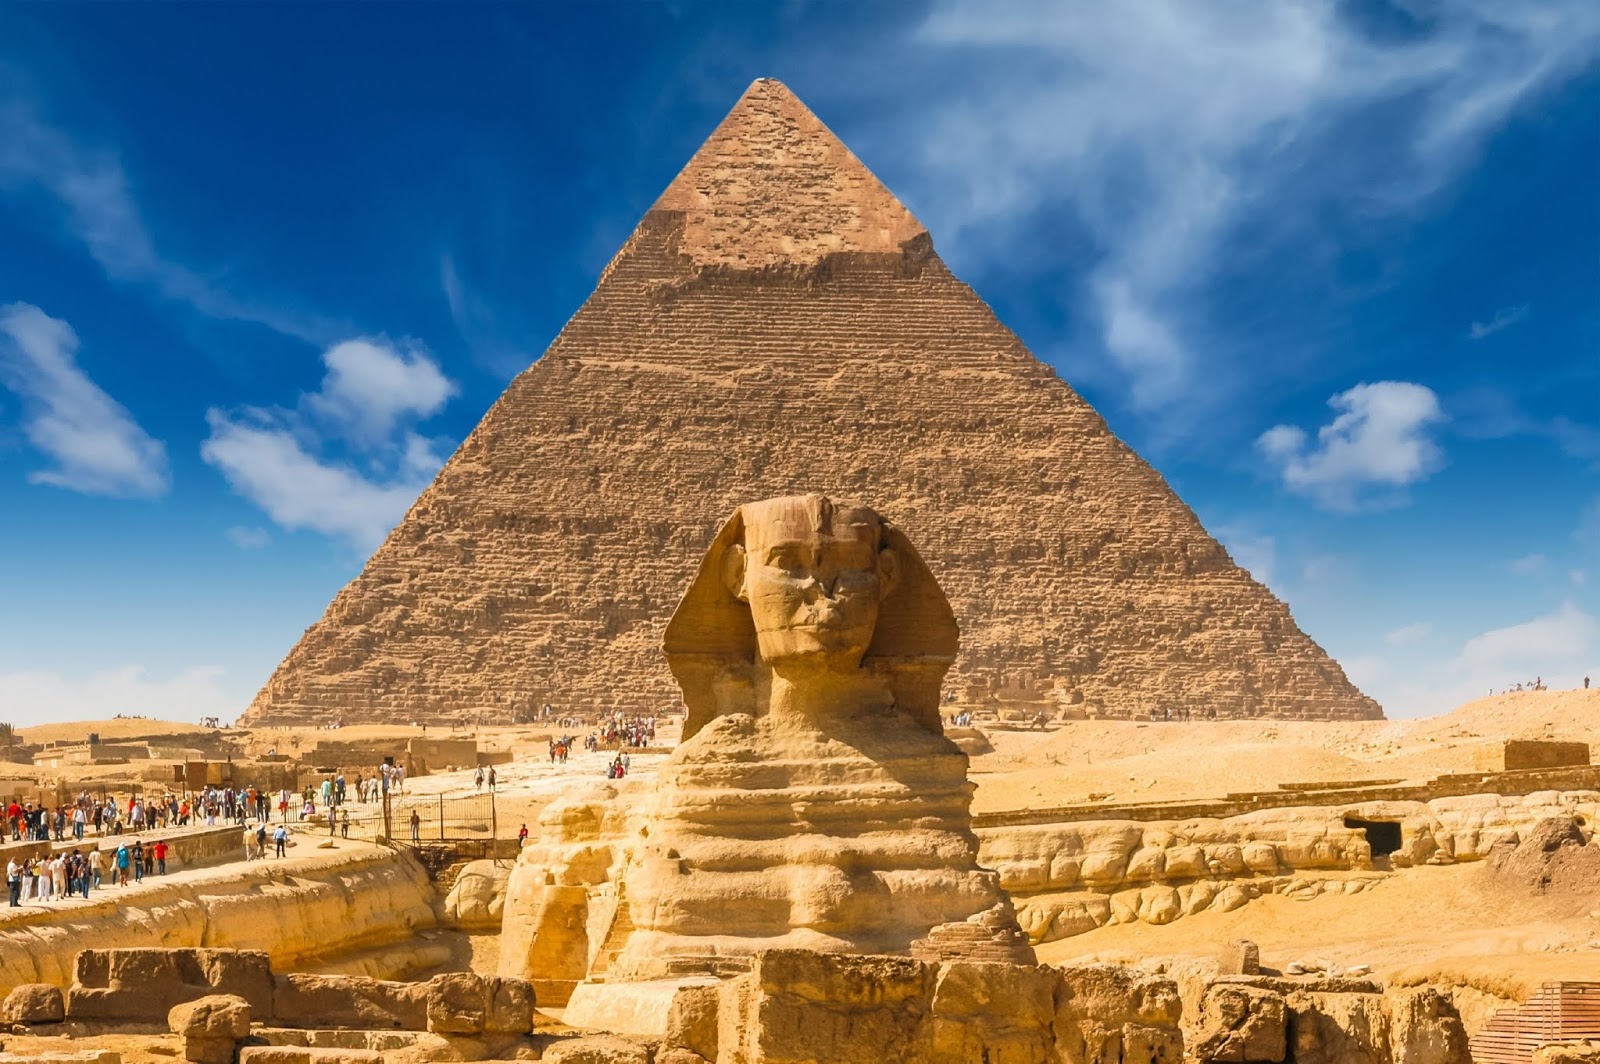 safe to visit pyramids in egypt